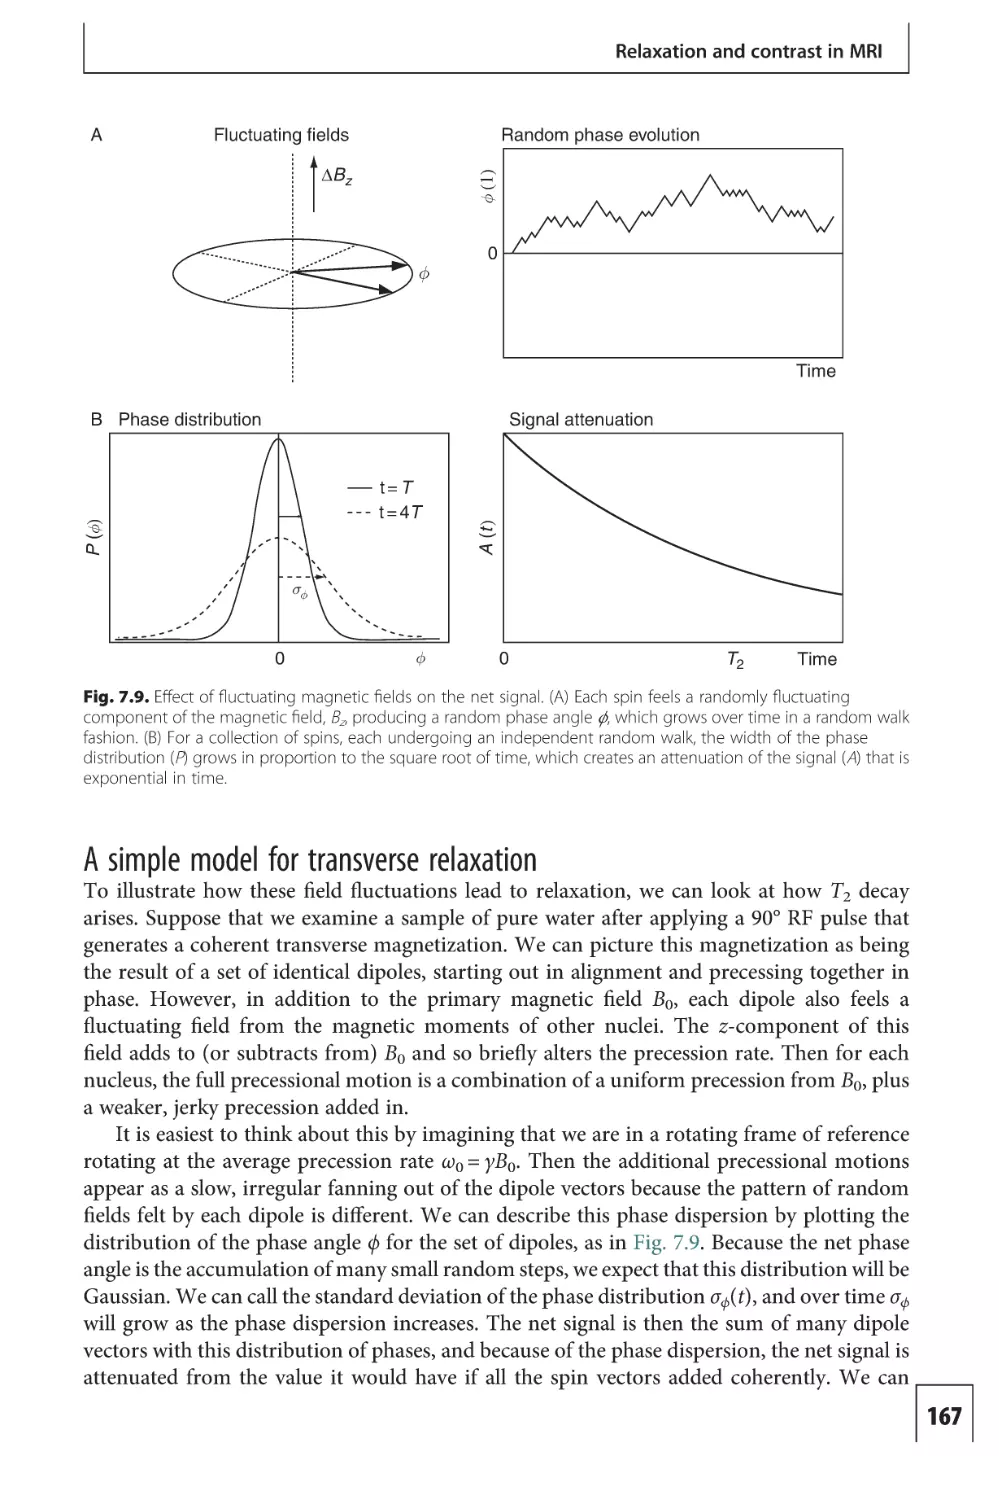 A simple model for transverse relaxation